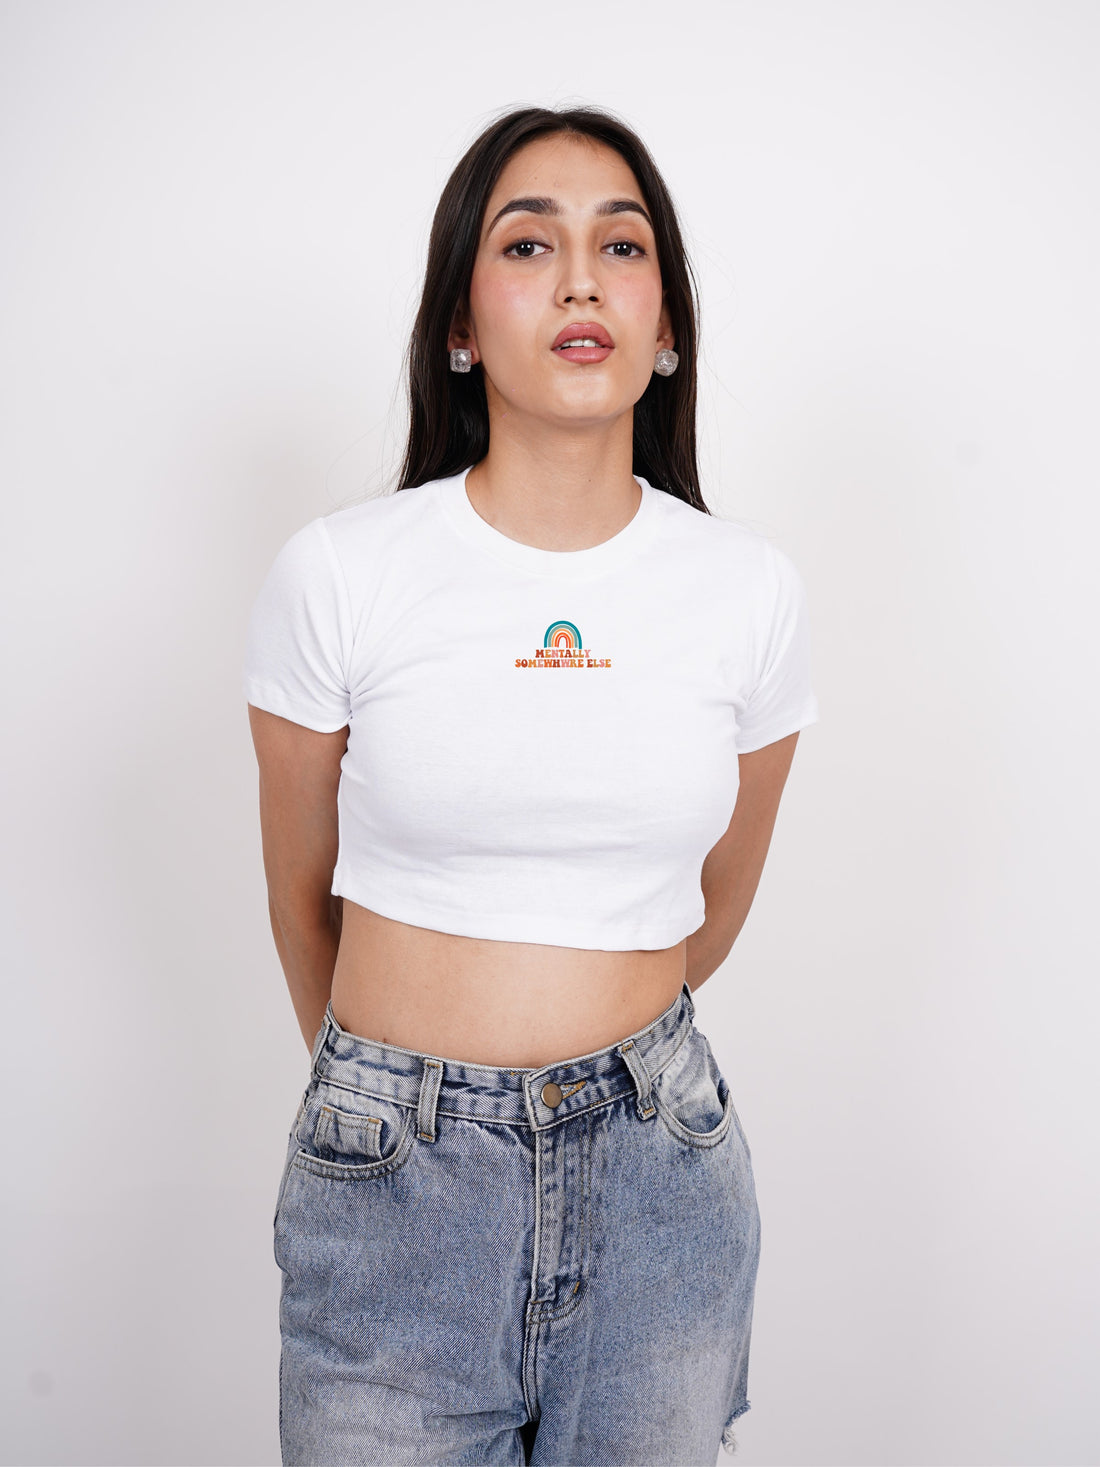 Mentally Somewhere Else - Burger Bae Round Neck Crop Baby Tee For Women